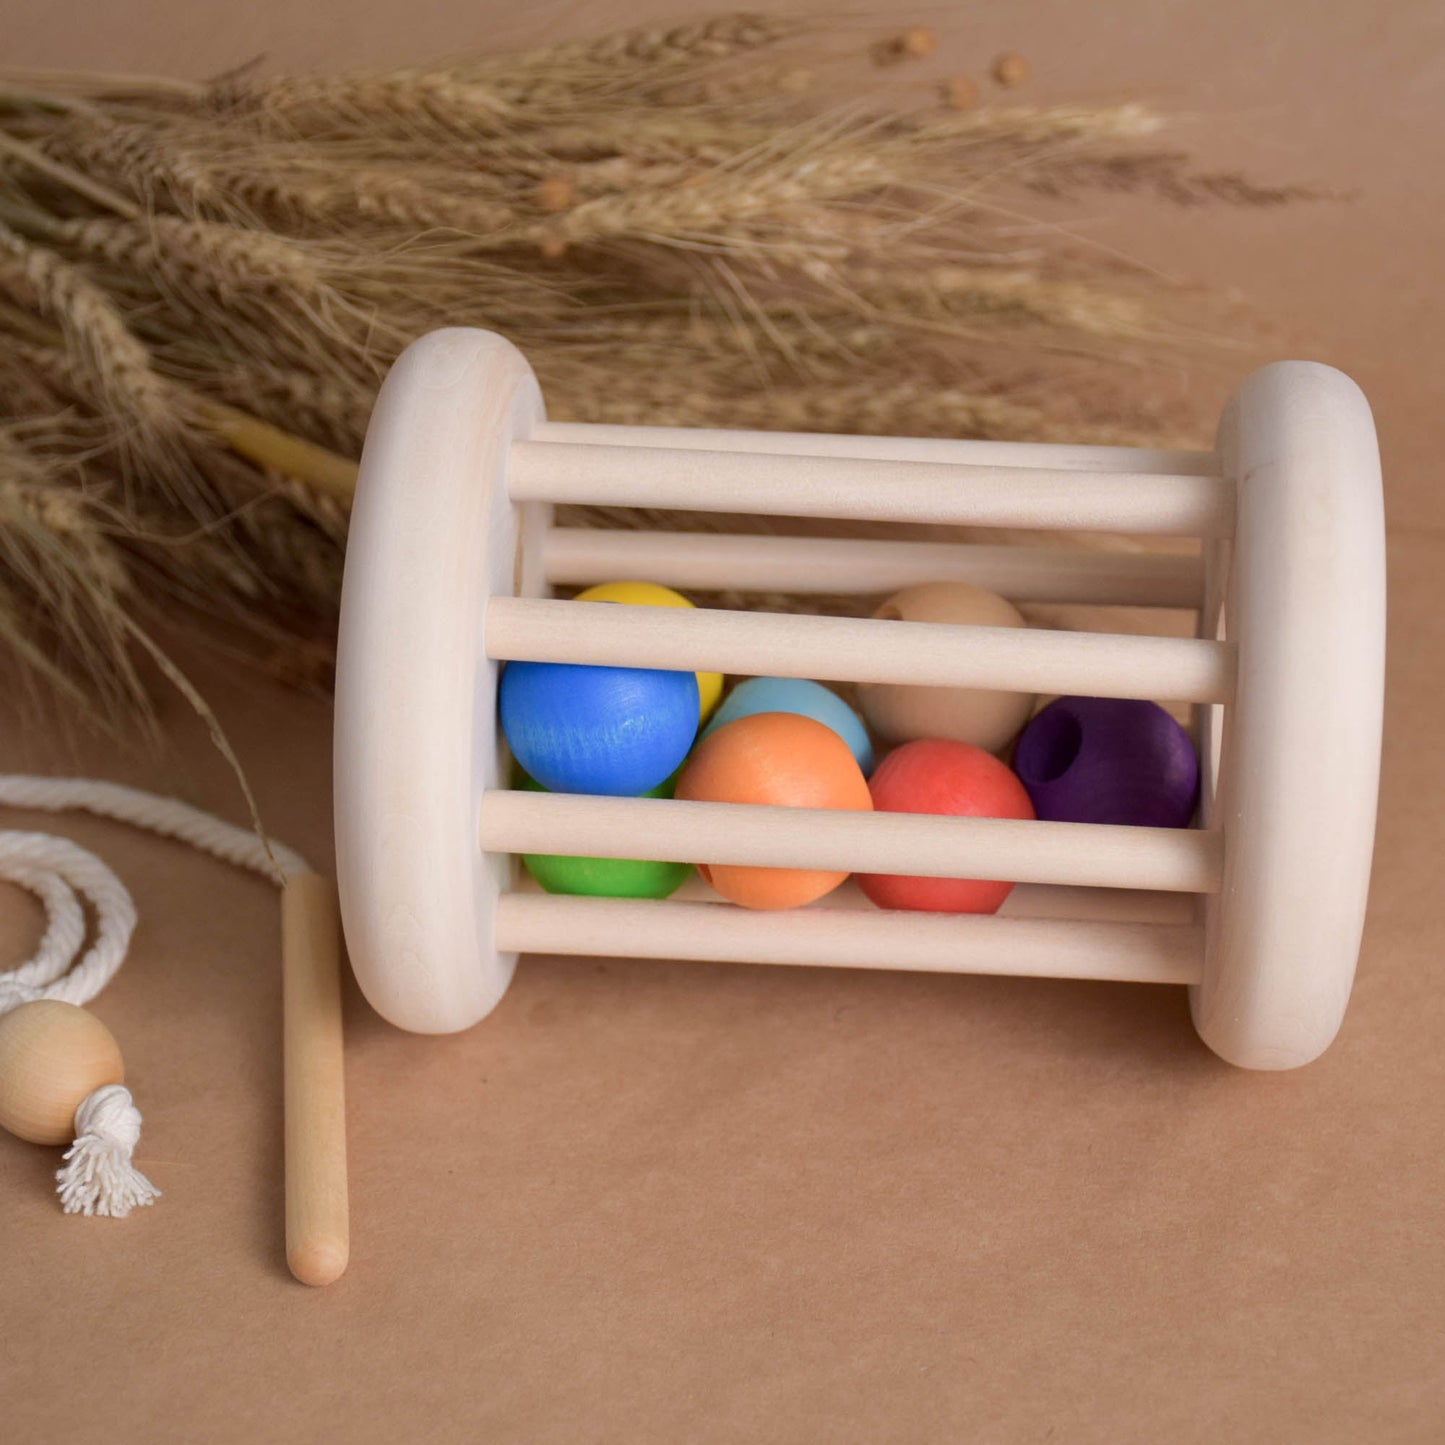 Montessori Classic Rolling Ball Cylinder Toy with Lacing Toy Rainbow Balls